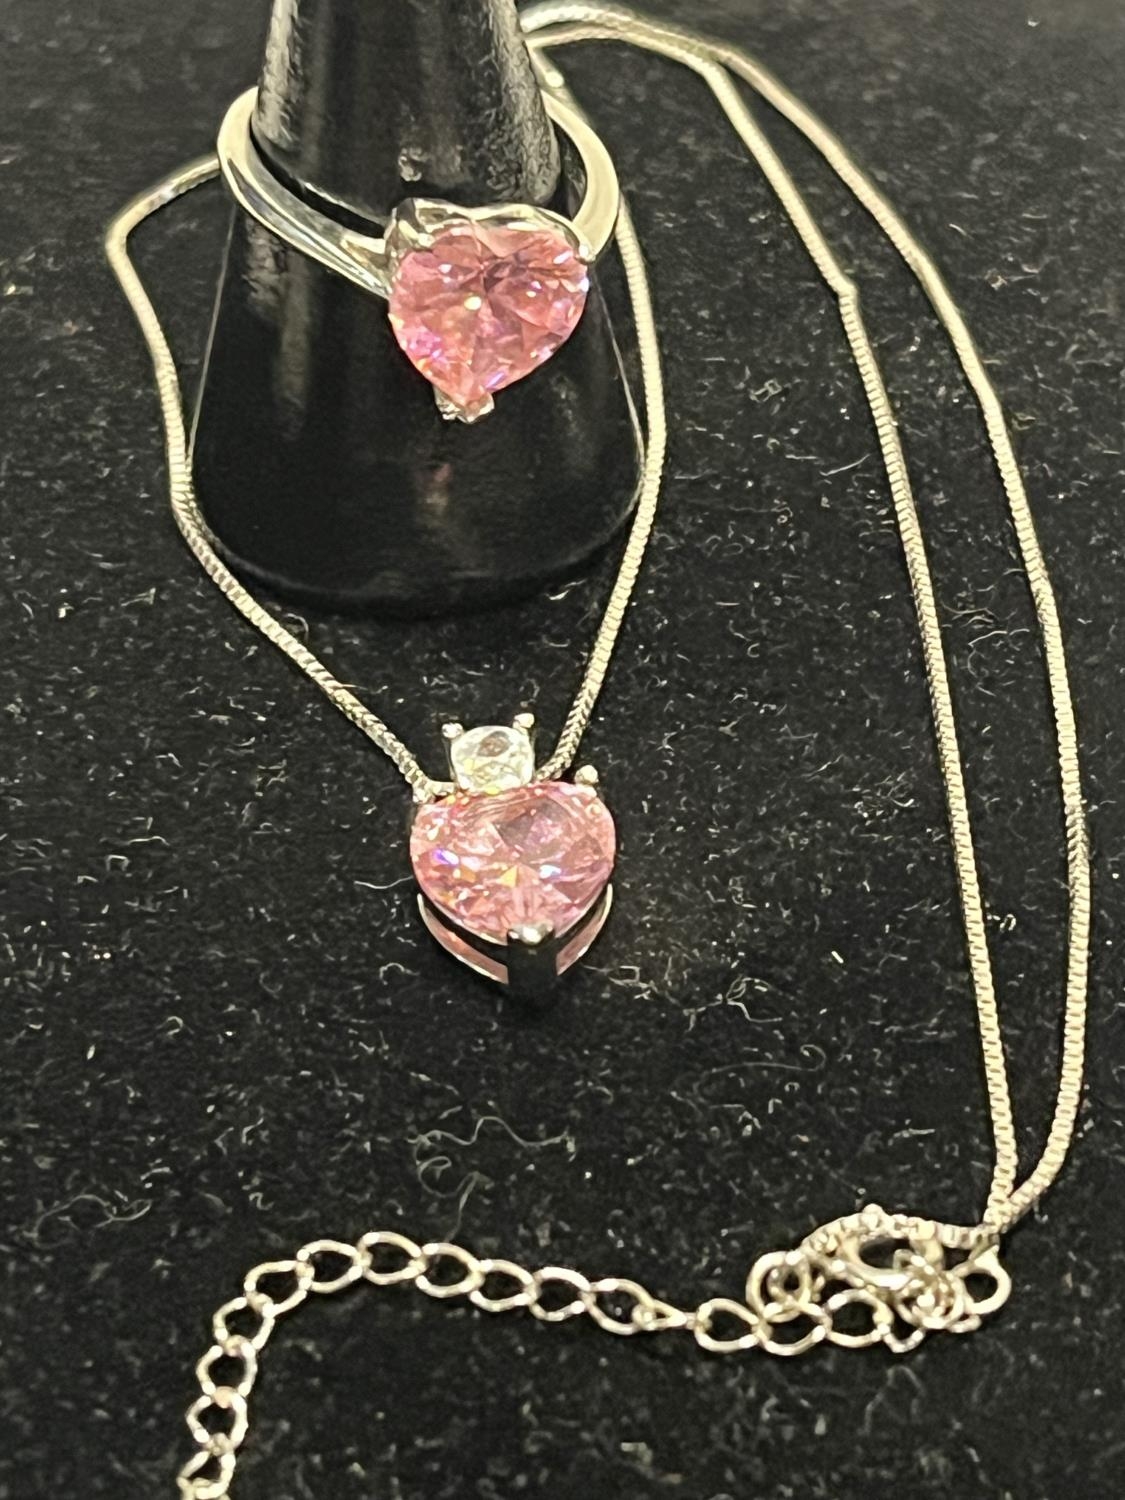 A 925 silver necklace, pendant and ring set with pink stones